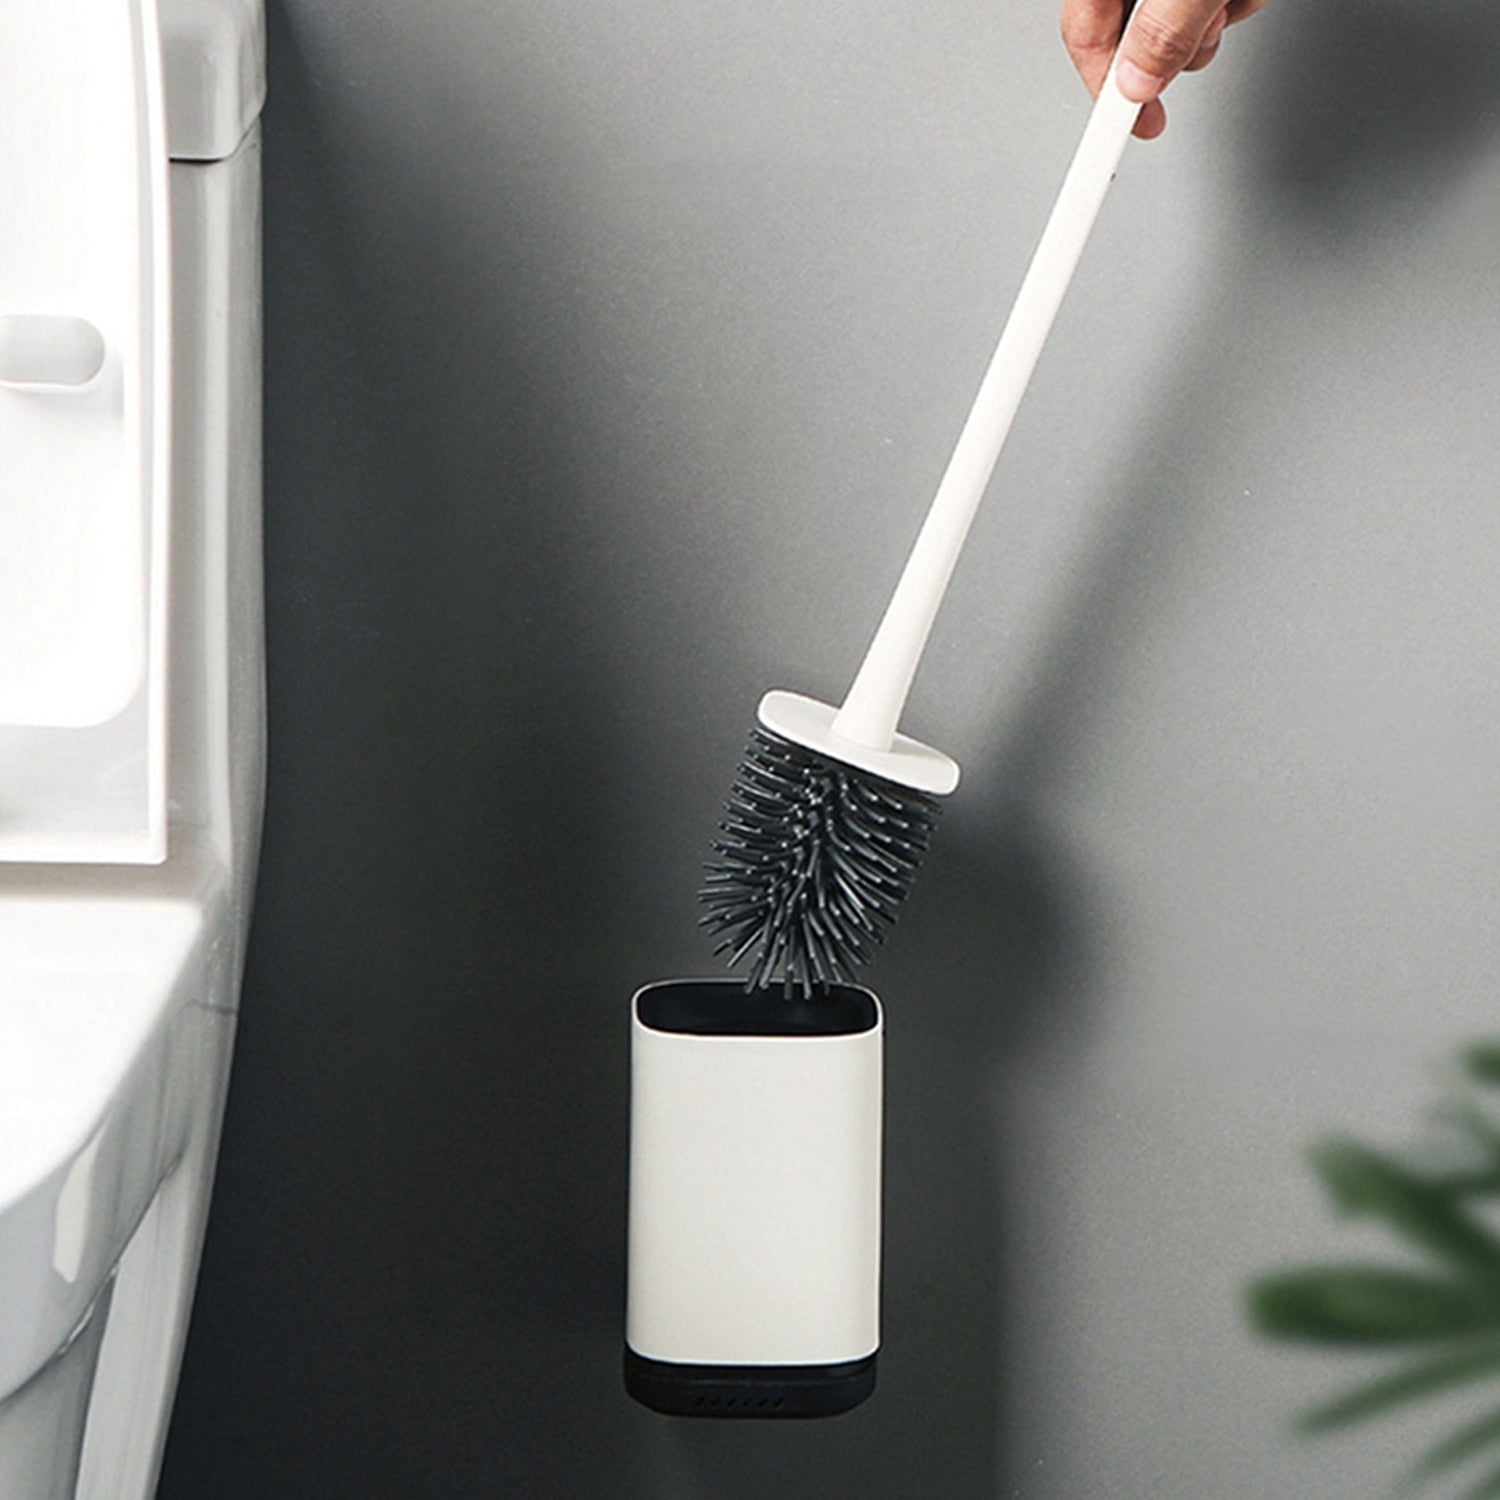 7601 Silicone Toilet Brush with Holder Stand , Brush for Bathroom Cleaning, Cleaning Silicone Brush and Holder DeoDap